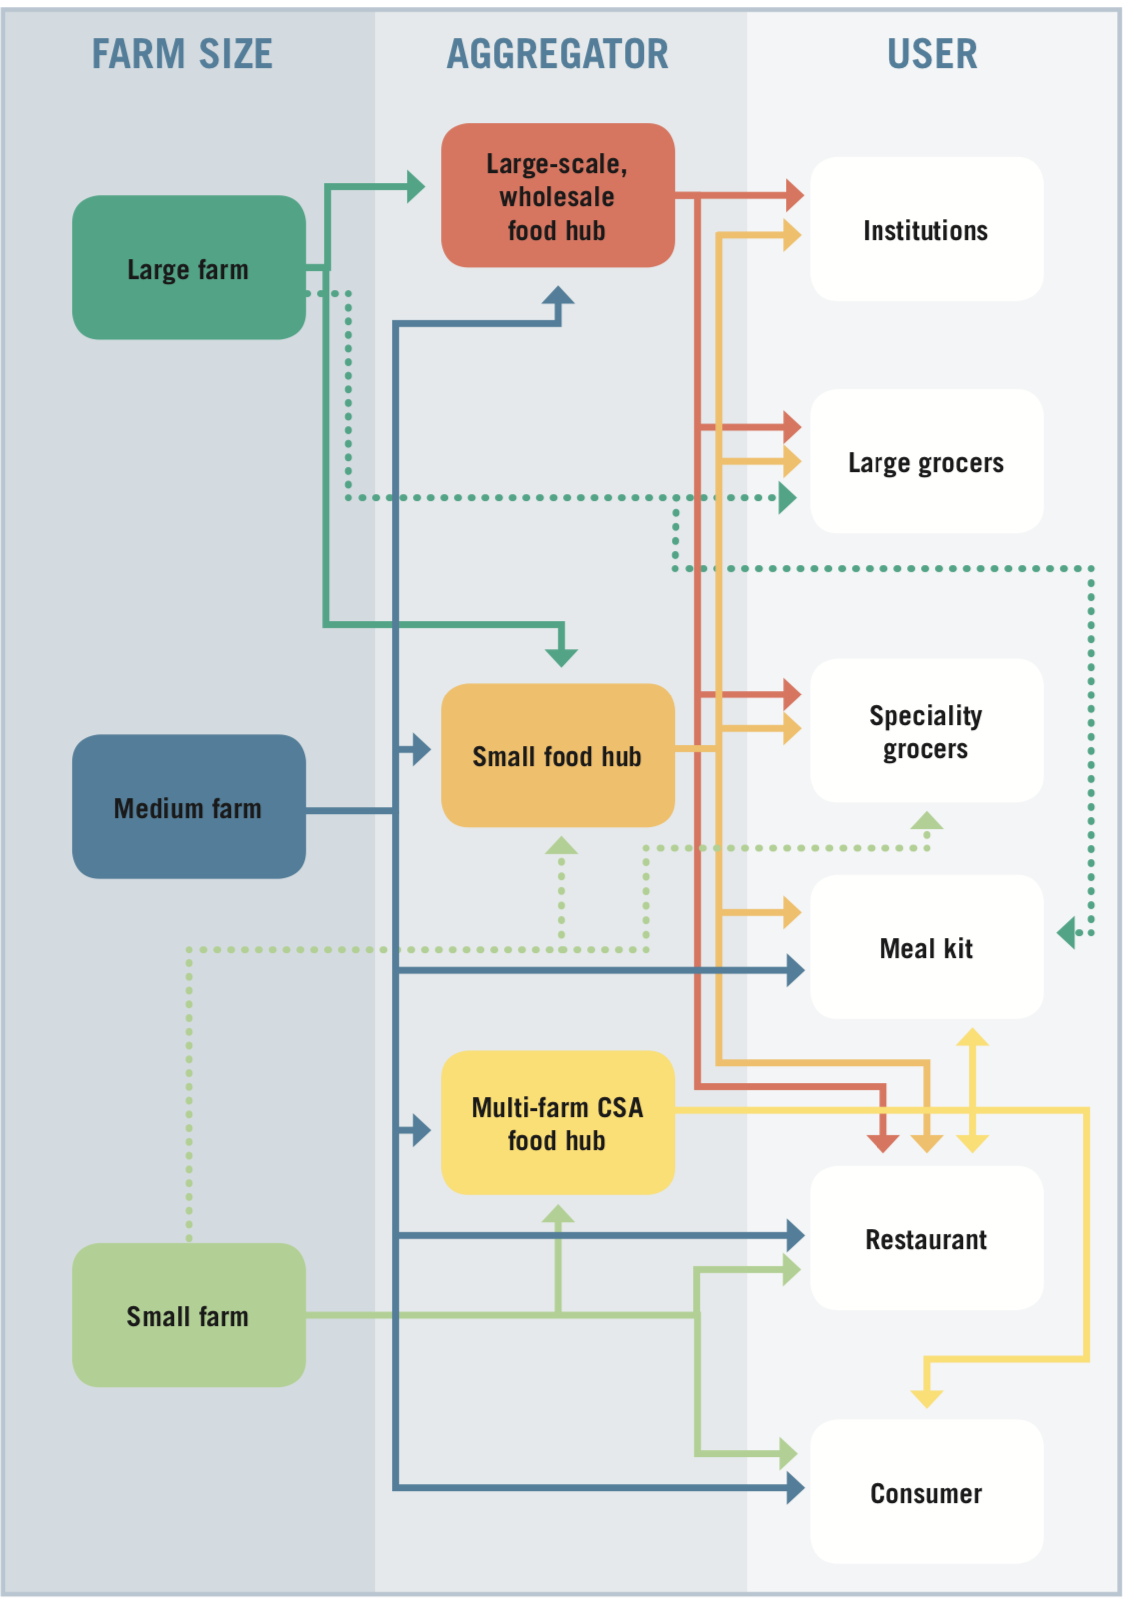 Flowchart connecting farm sizes with various aggregators and users. Farm sizes are large, medium, and small. Aggregators are large-scale, wholesale food hubs; small food hubs; and multi-farm CSA food hubs. Users are institutions, large grocers, specialty grocers, meal kits, restaurants, and consumers.